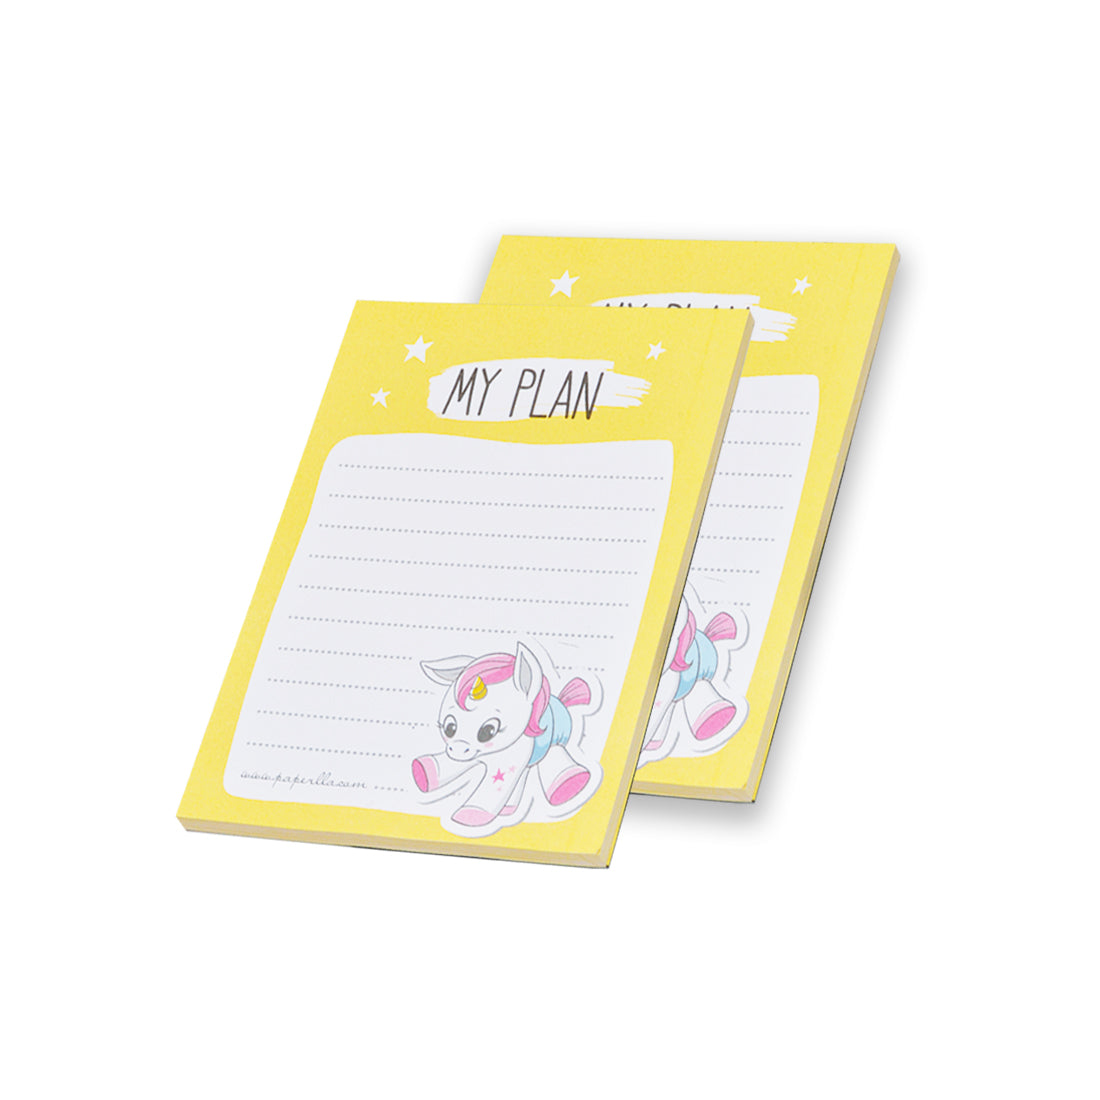 UNICORN NOTEPADS UNDATED PLANNER, TO DO LIST DIARY TRAVEL ORGANIZER NOTES JOURNAL FAREWELL GIFTS FOR COLLEAGUES, SET OF 4